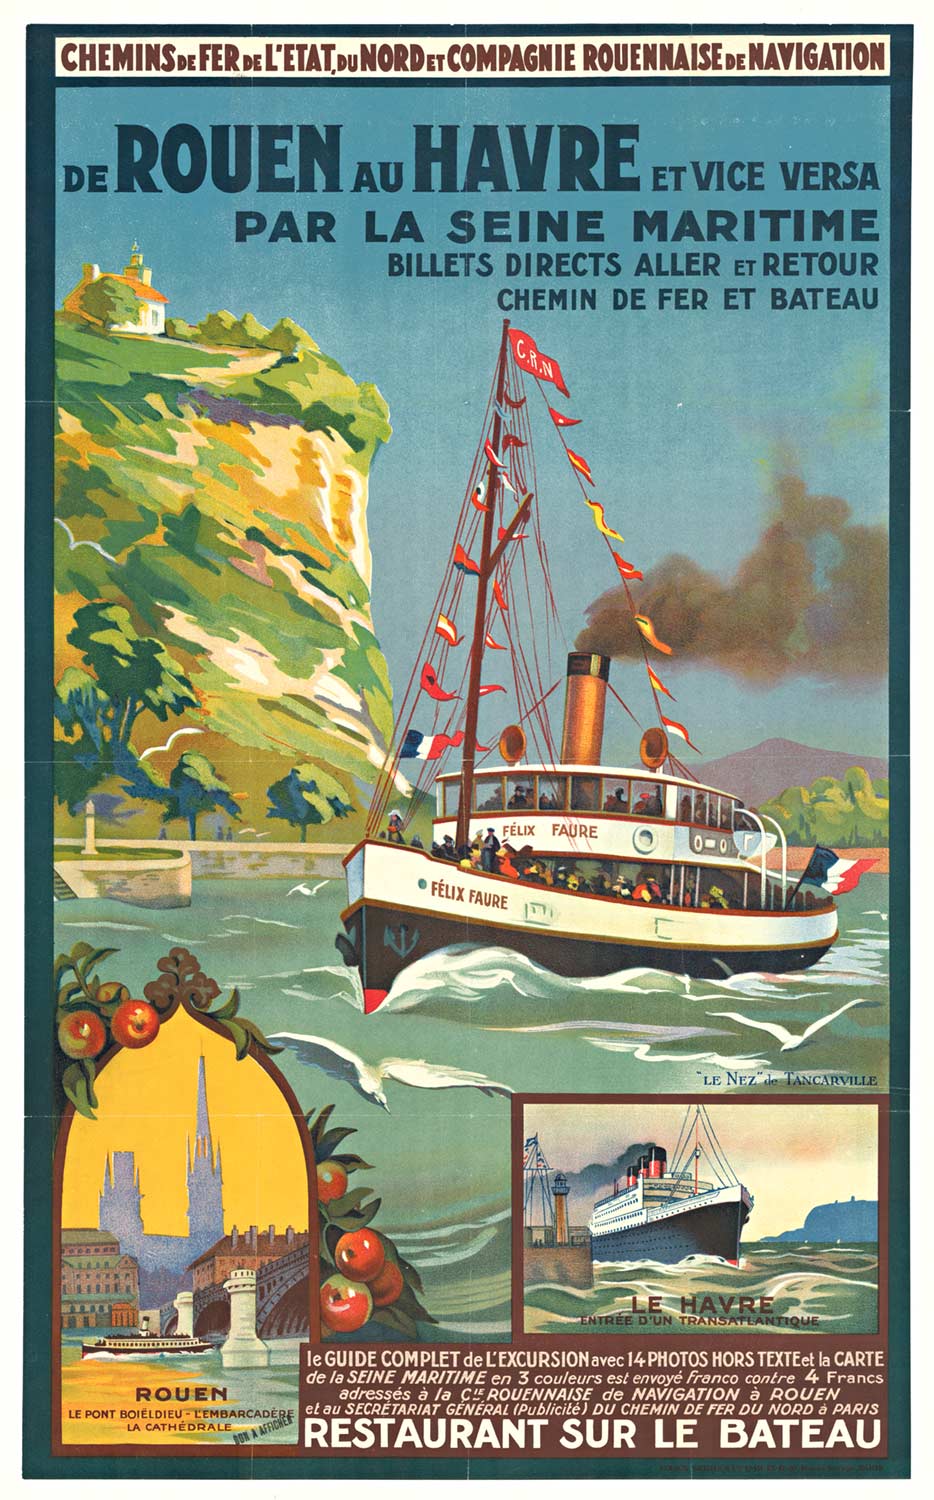 ferry, ship, habor scenes, ocean, water, linen backed, travel by boat, original French poster, linen backed, very good condition.